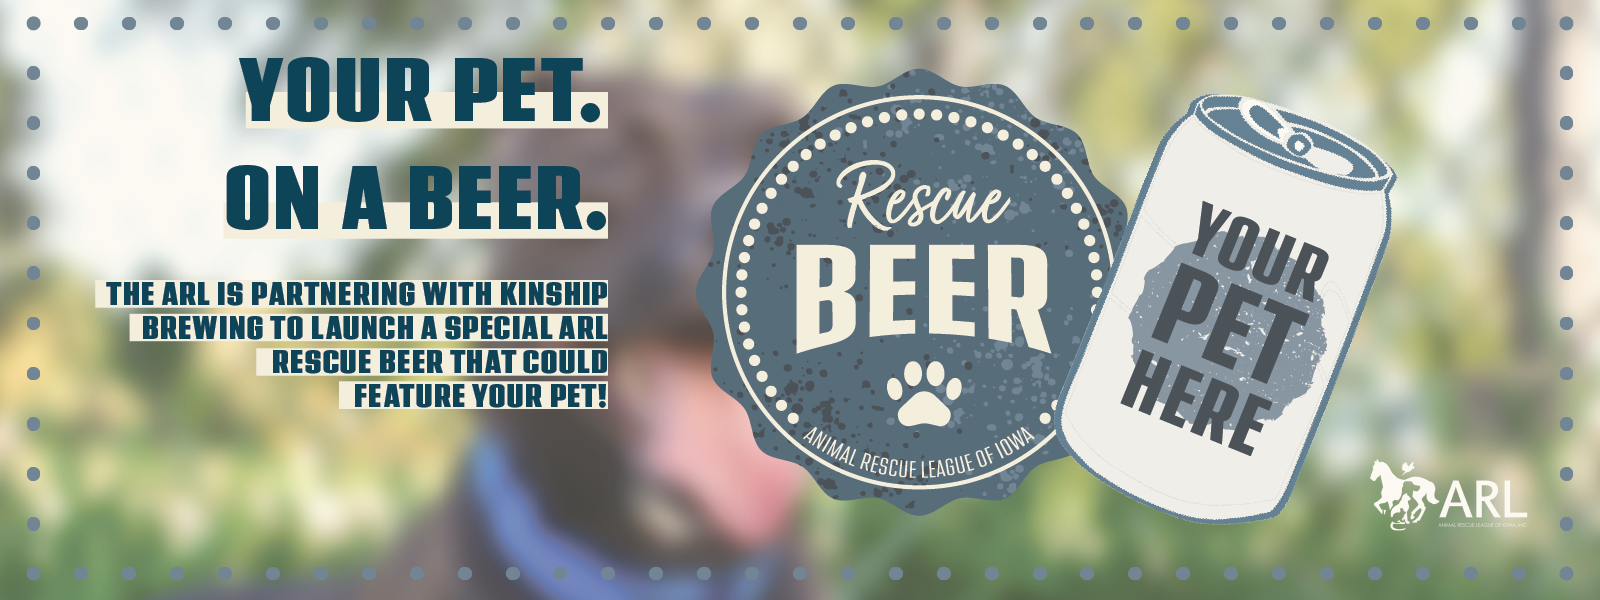 Rescue Beer